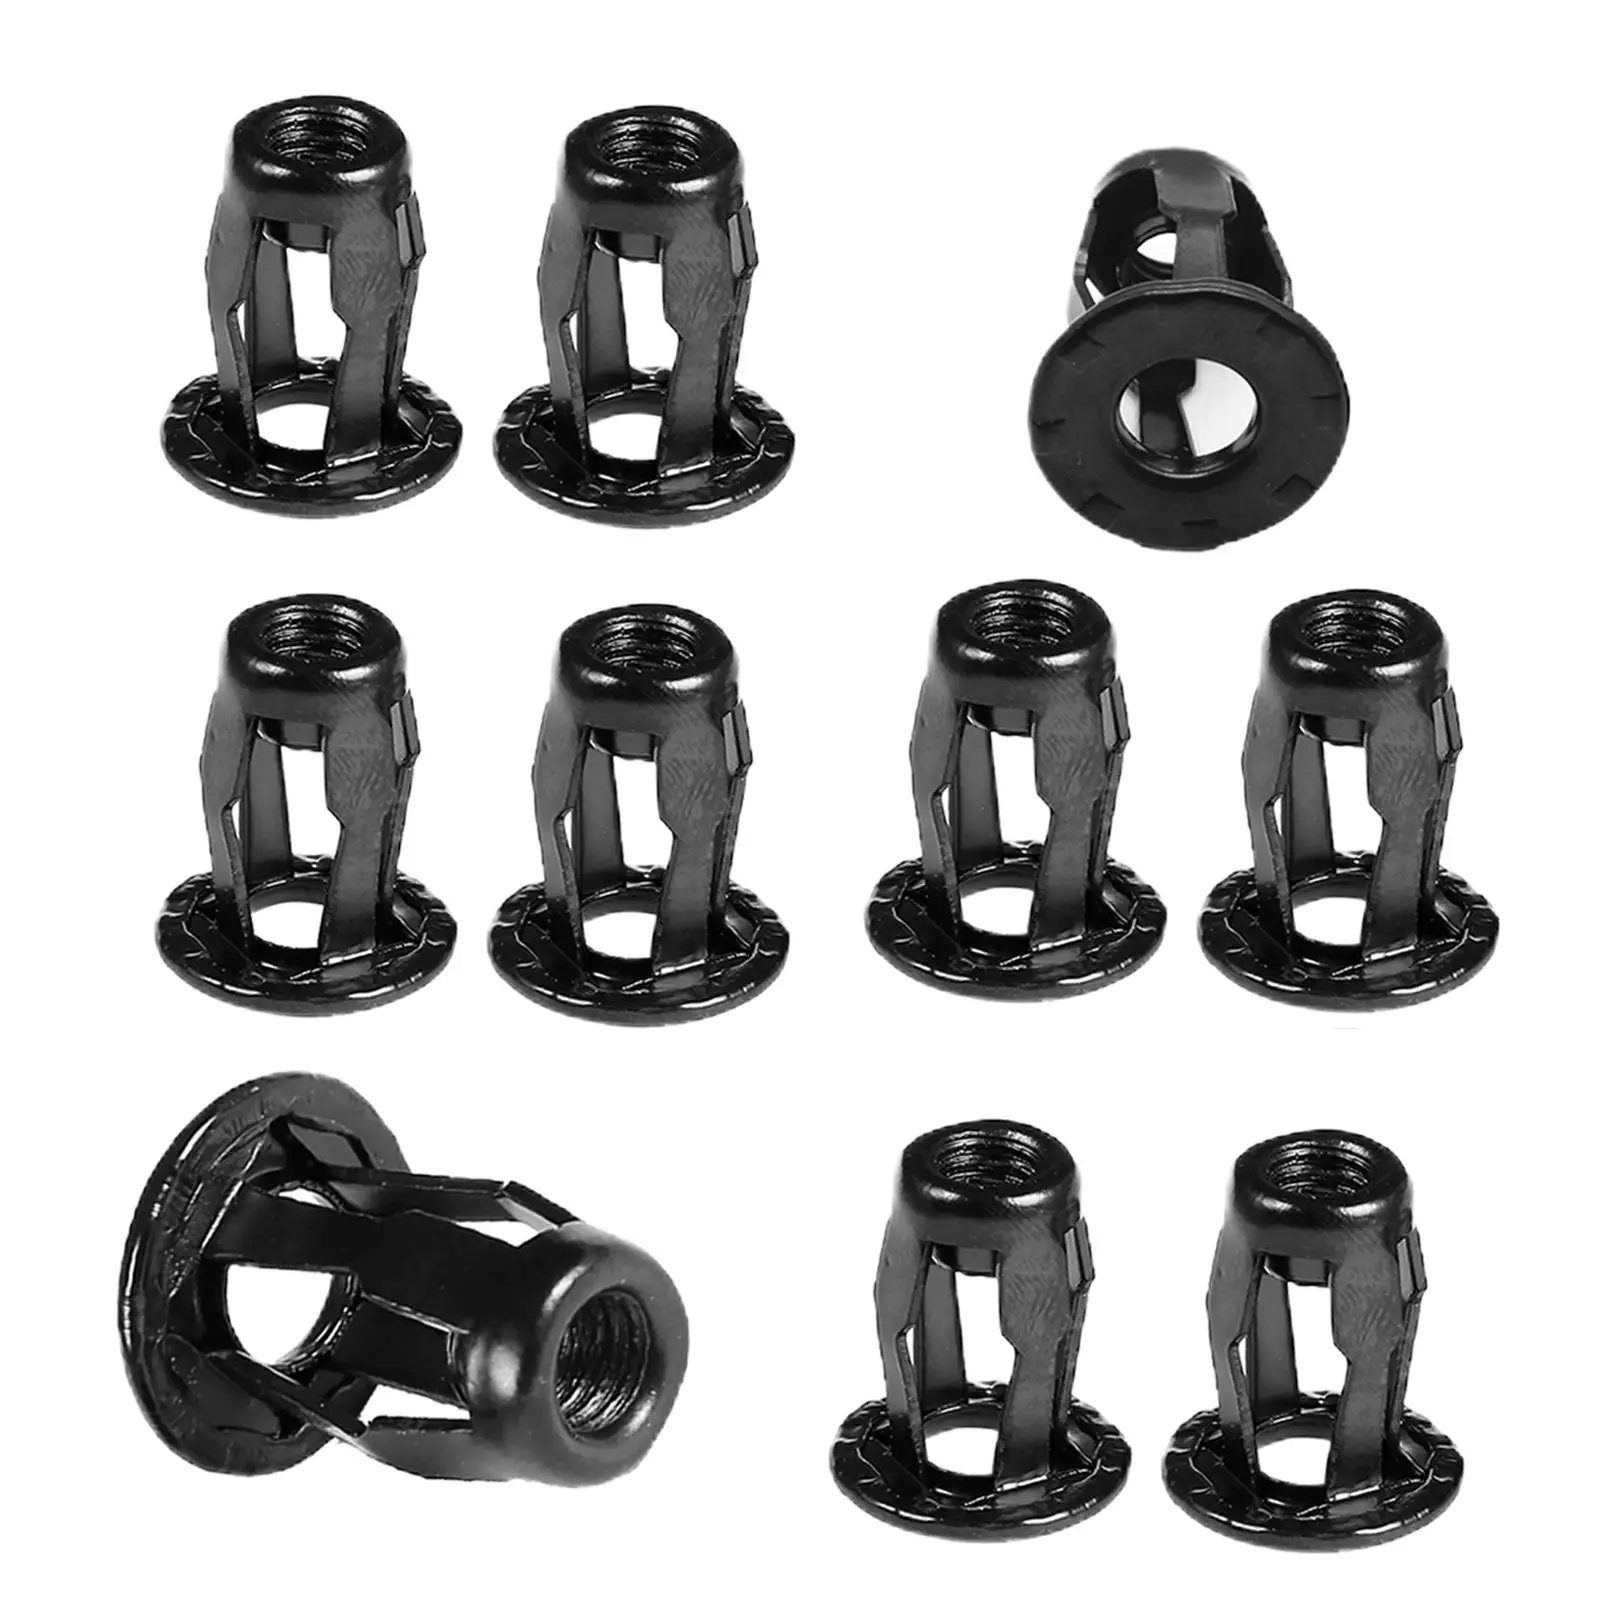 10Pcs Screw Base Clamp Trunk Nuts Spare Parts License Plate Fastener Clips Fit for Audi